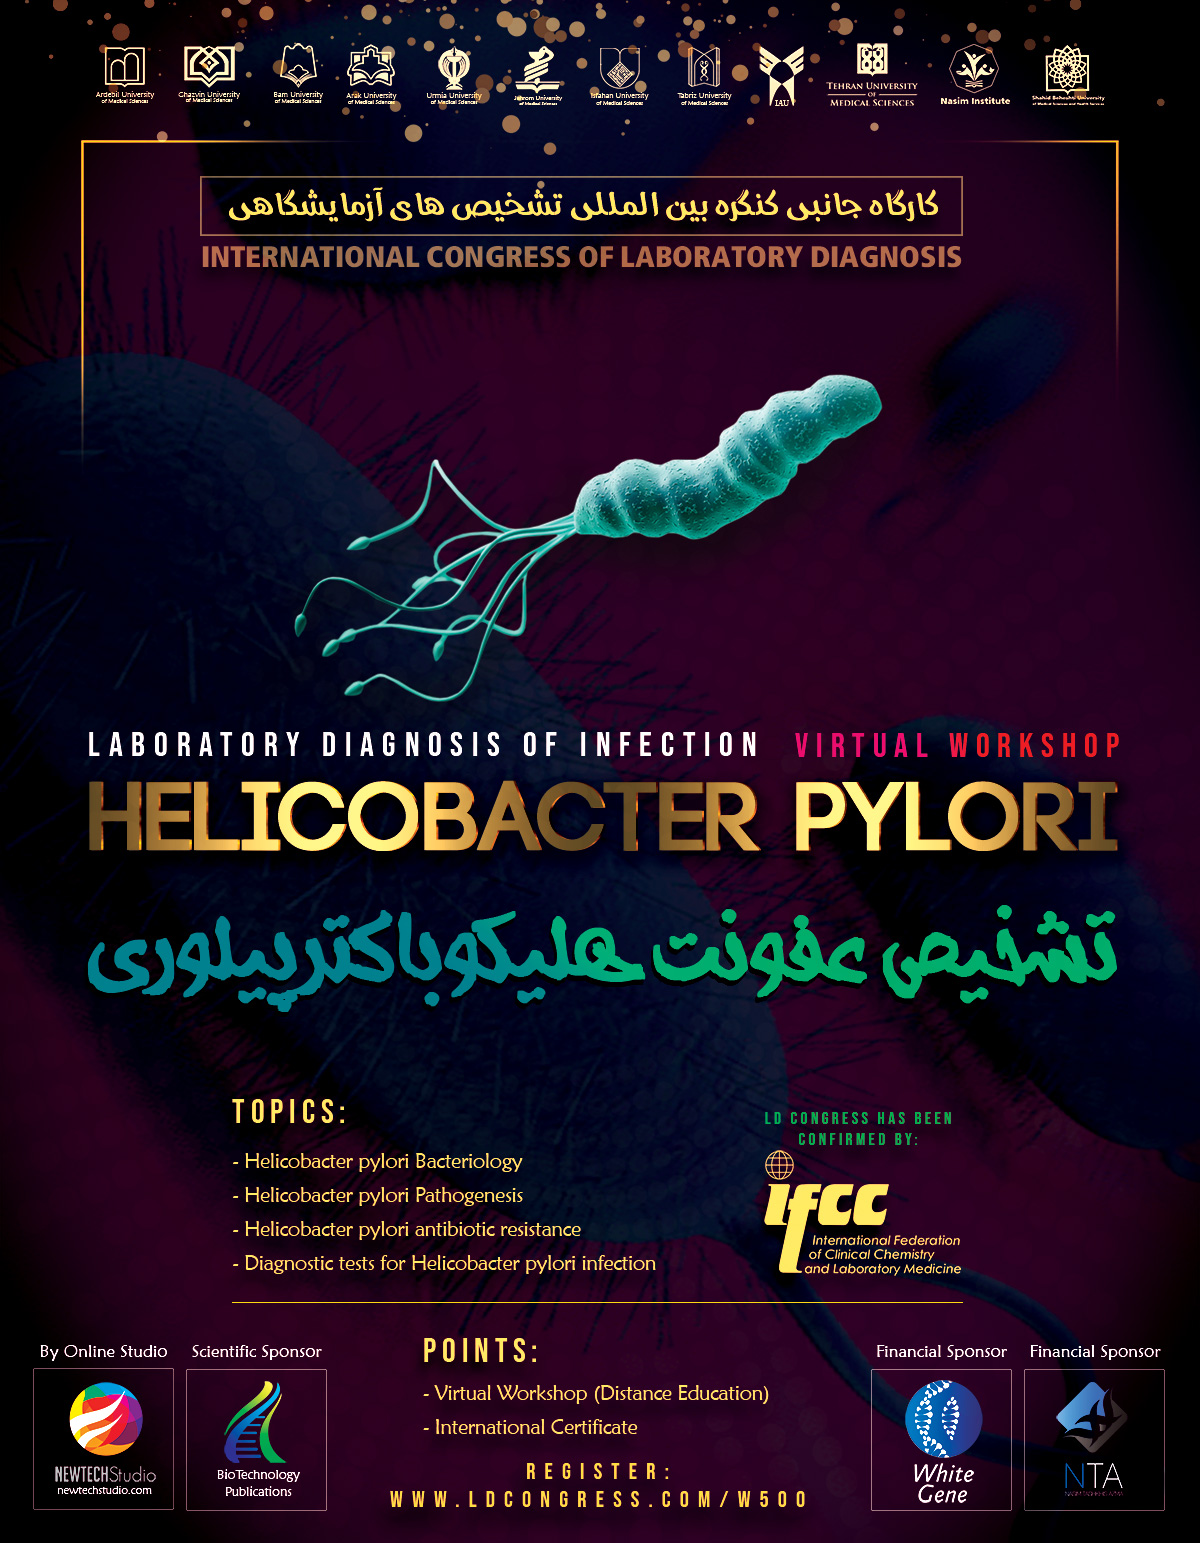 Laboratory diagnostic tests for Helicobacter pylori infection